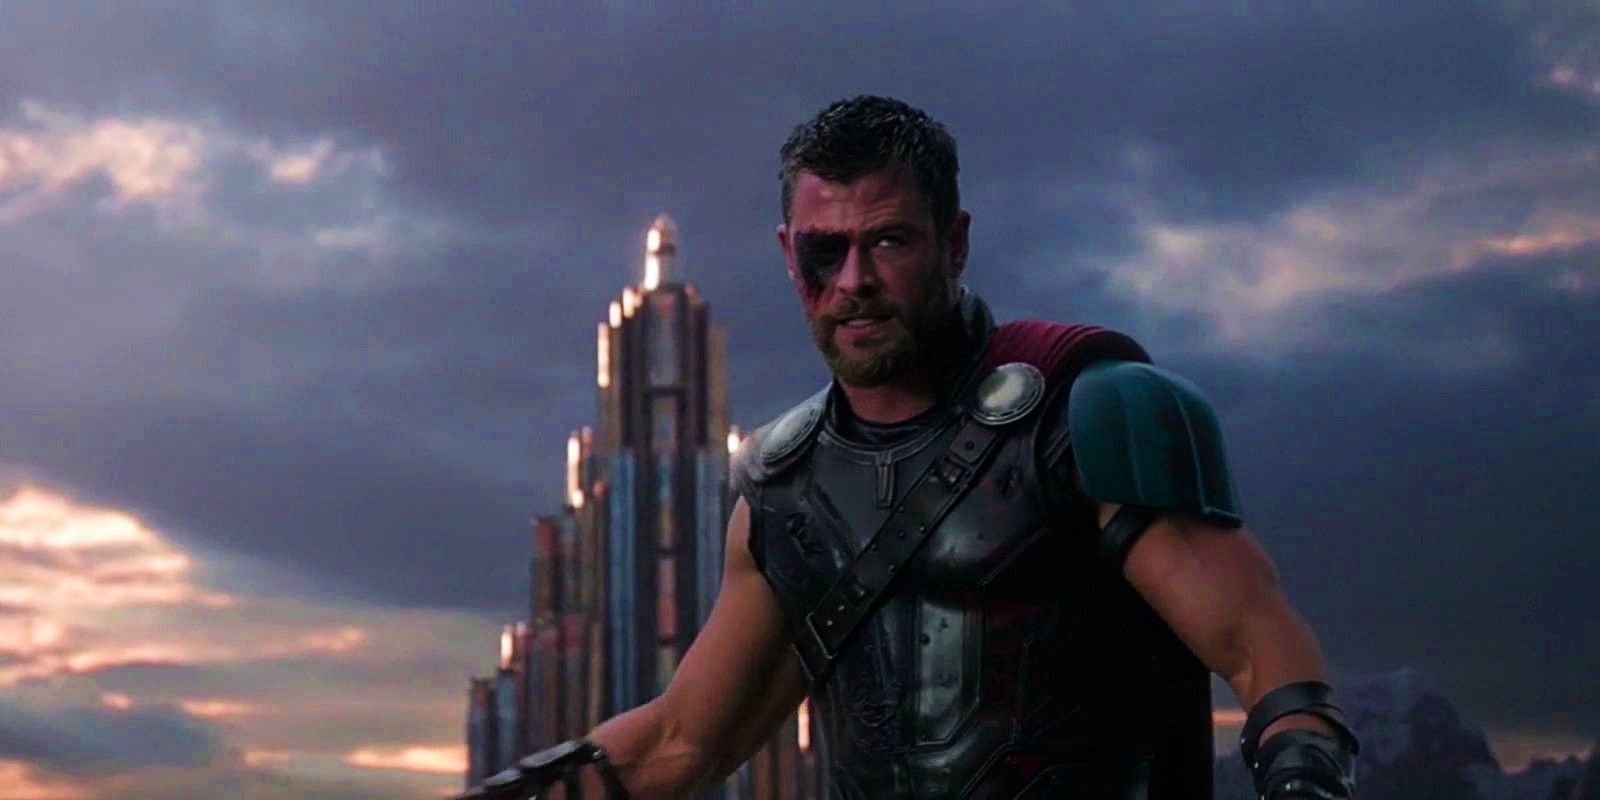 Thor with his eyepatch and shorter hair in Thor: Ragnarok